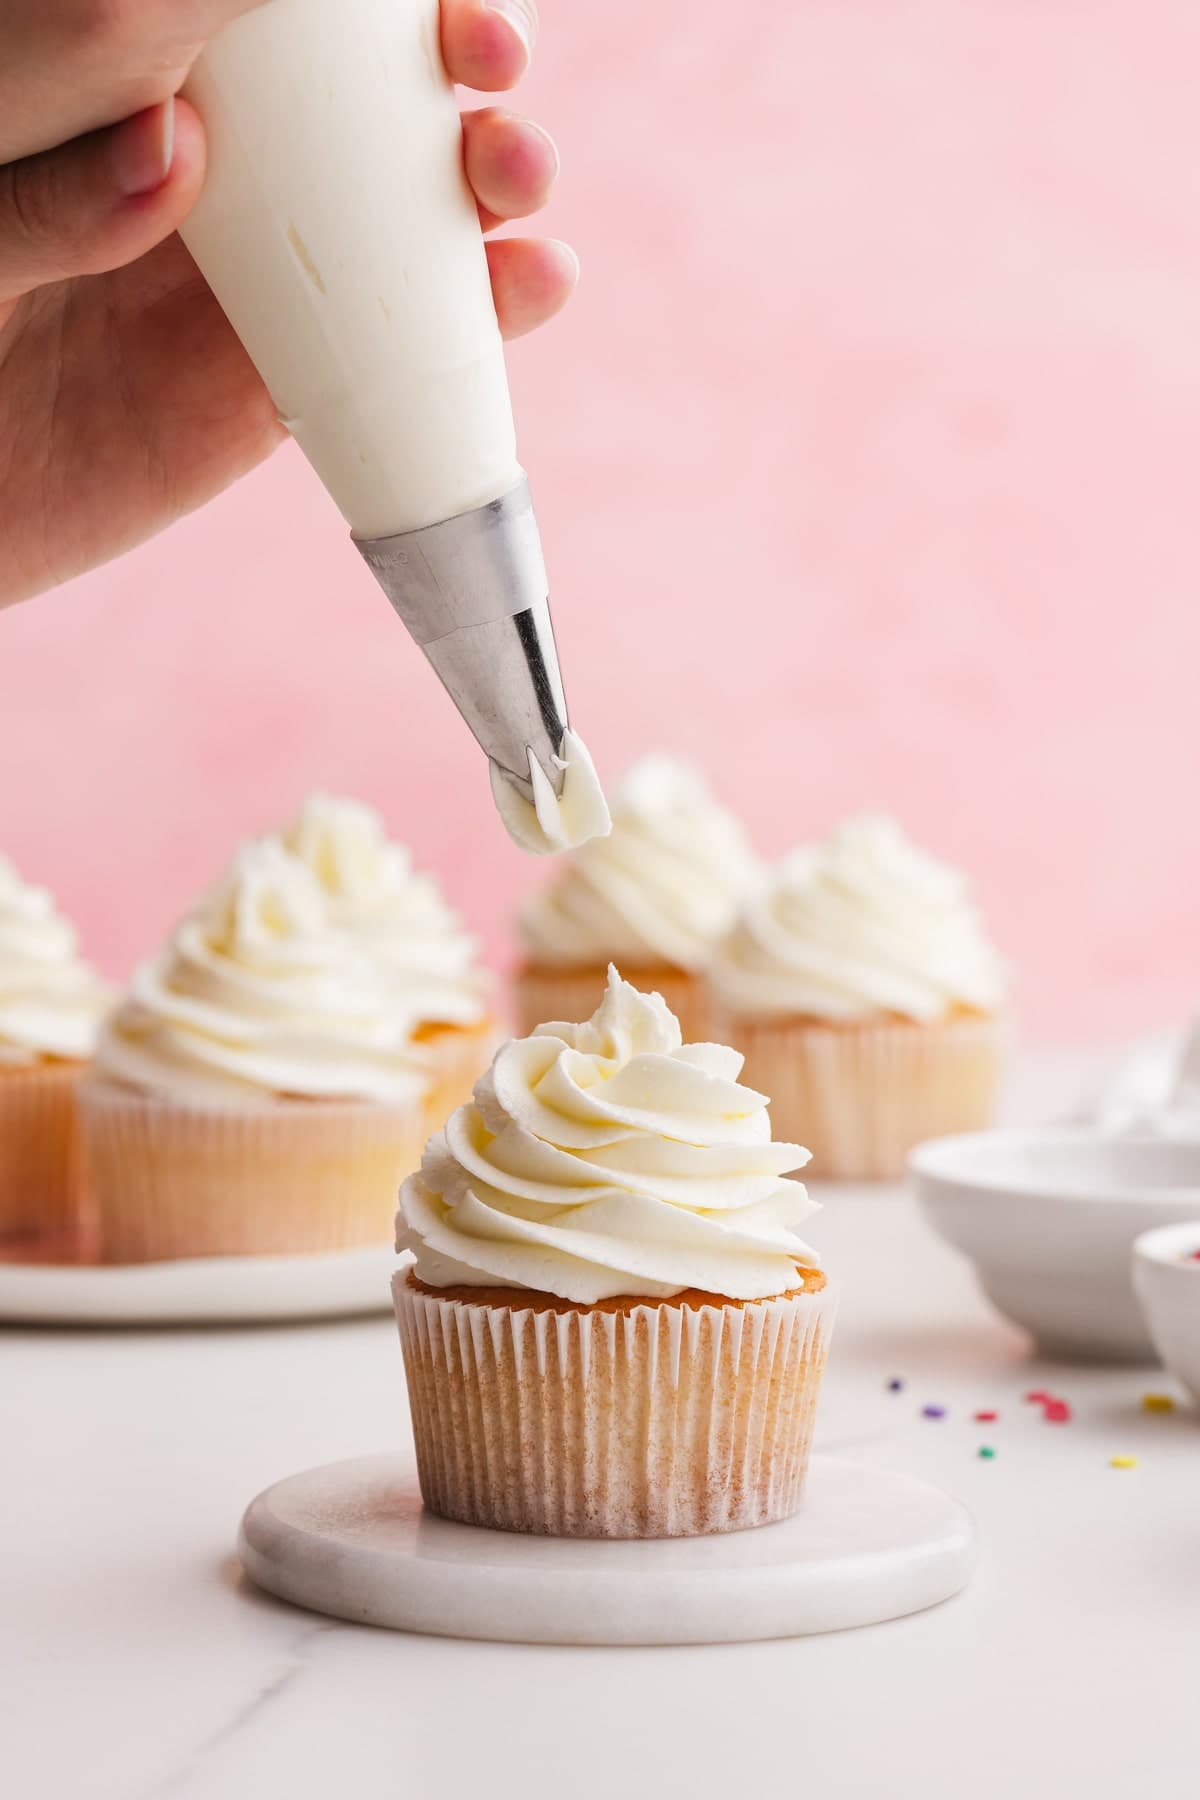 buttercream frosting piped onto a cupcake